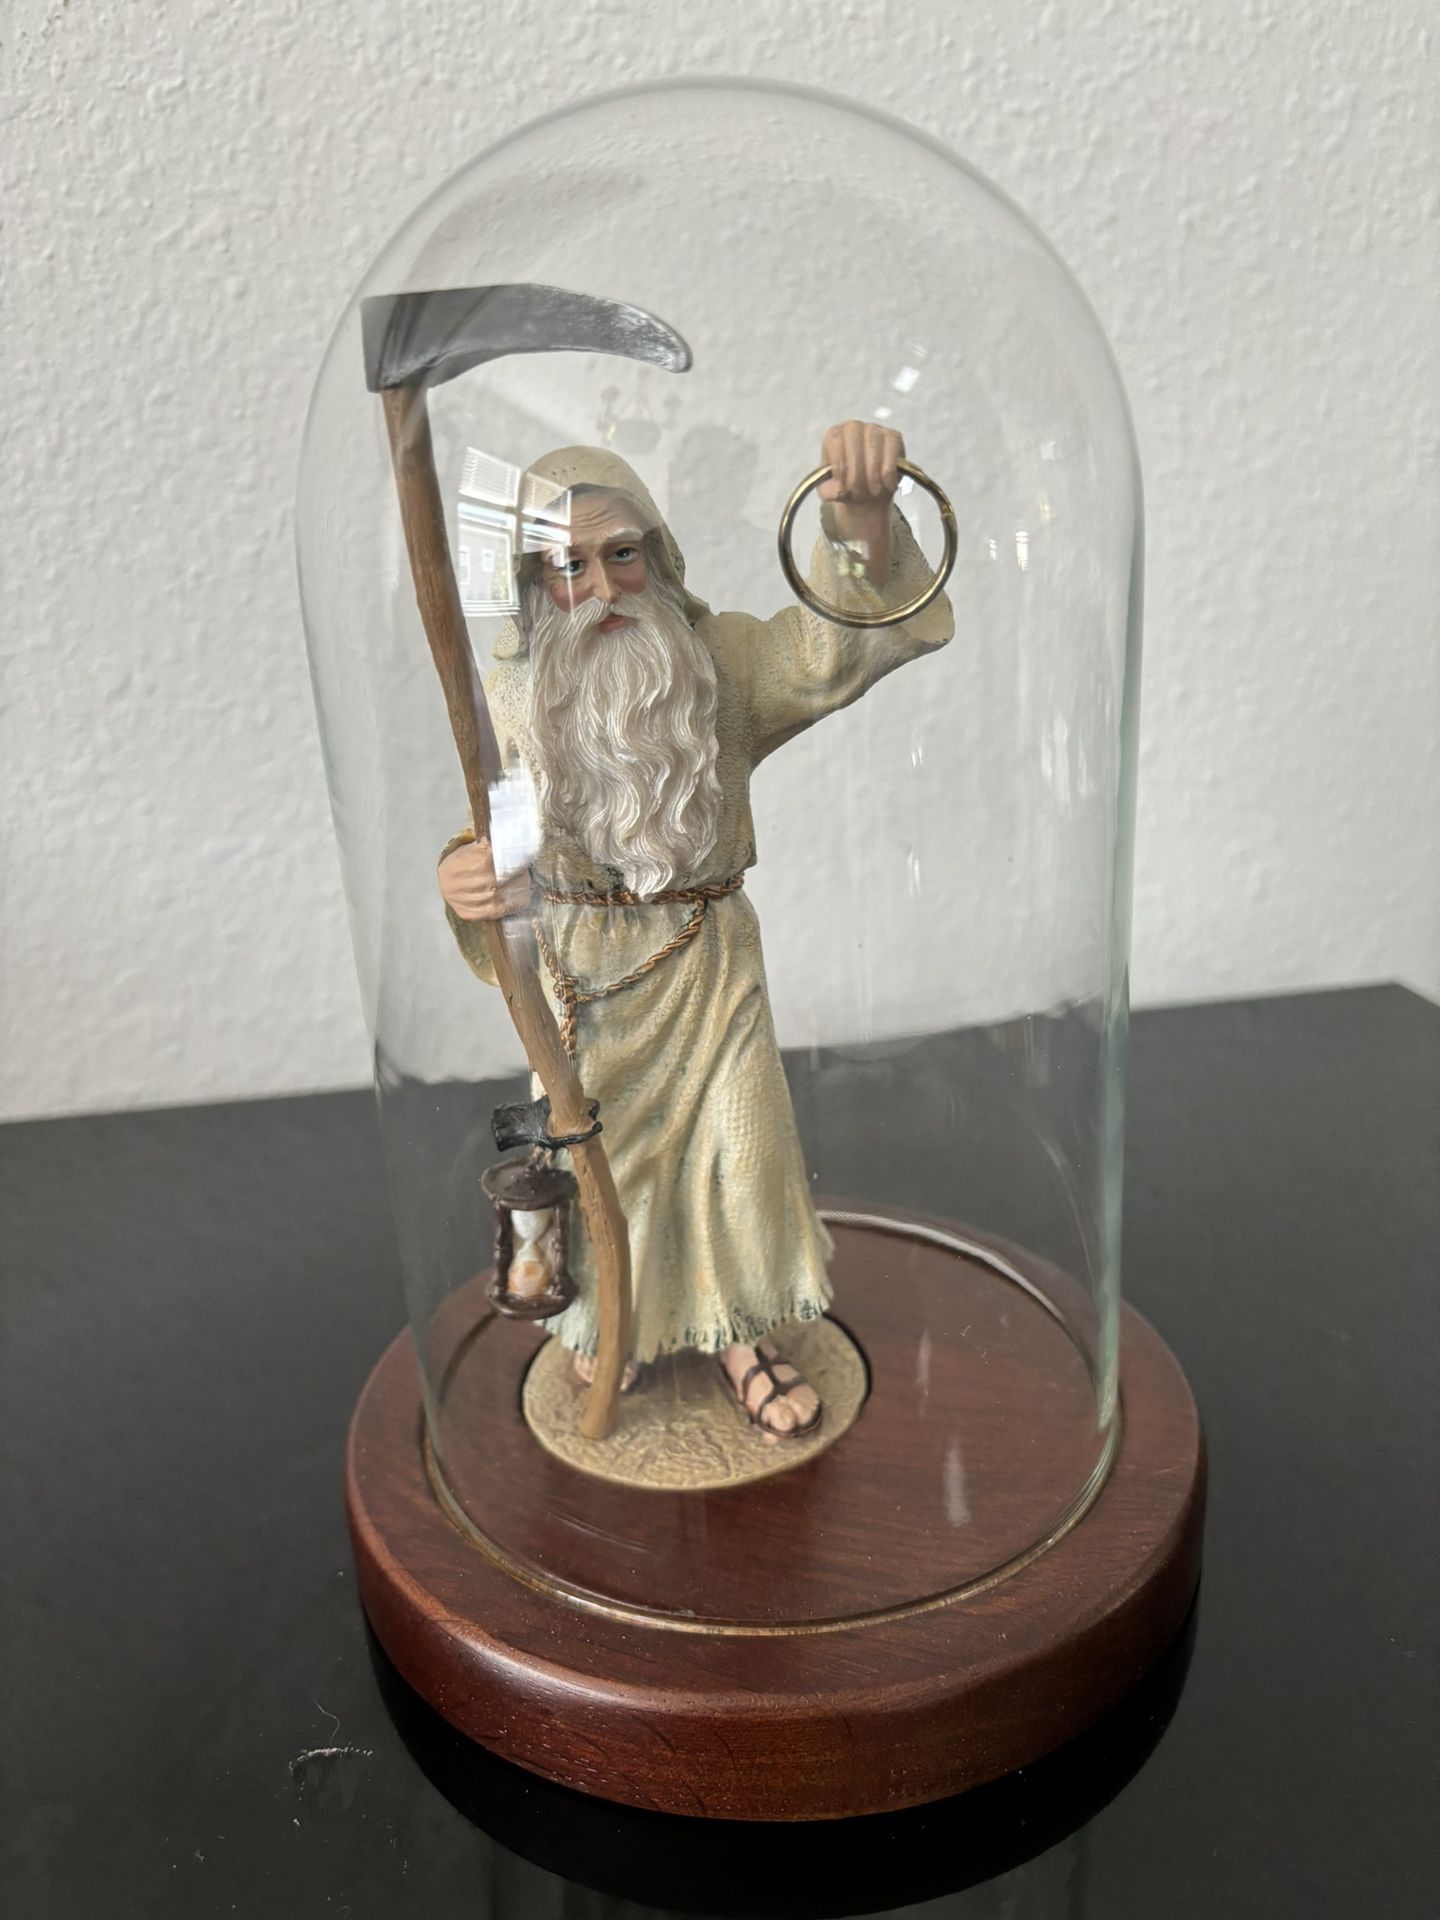 Toscano Father Time Pocket Watch Or Jewelry Holder